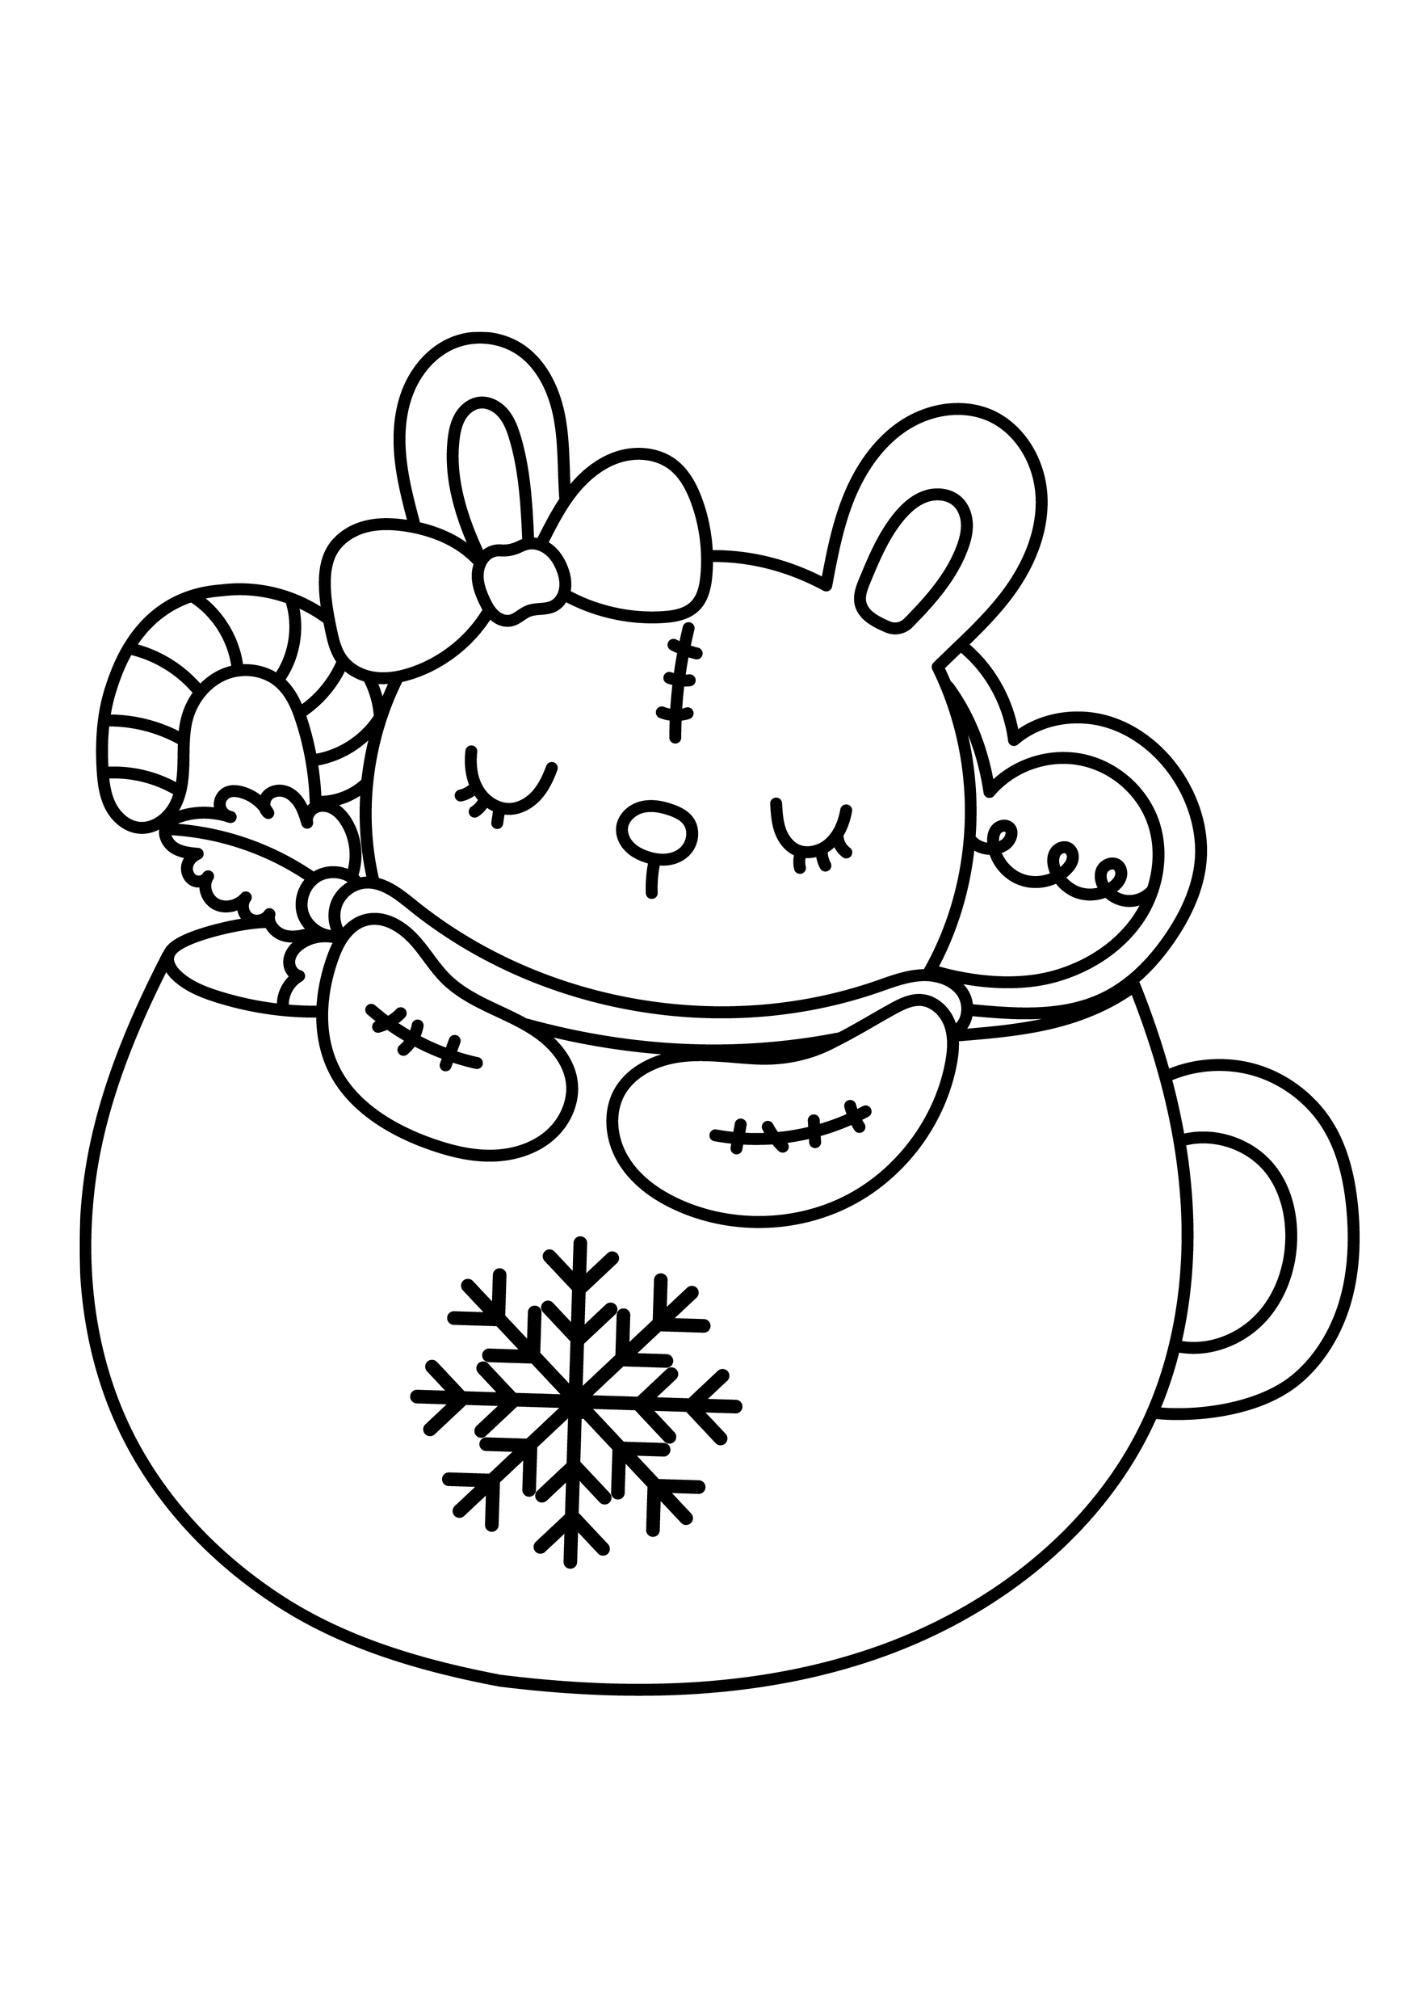 Christmas Rabbit coloring pages